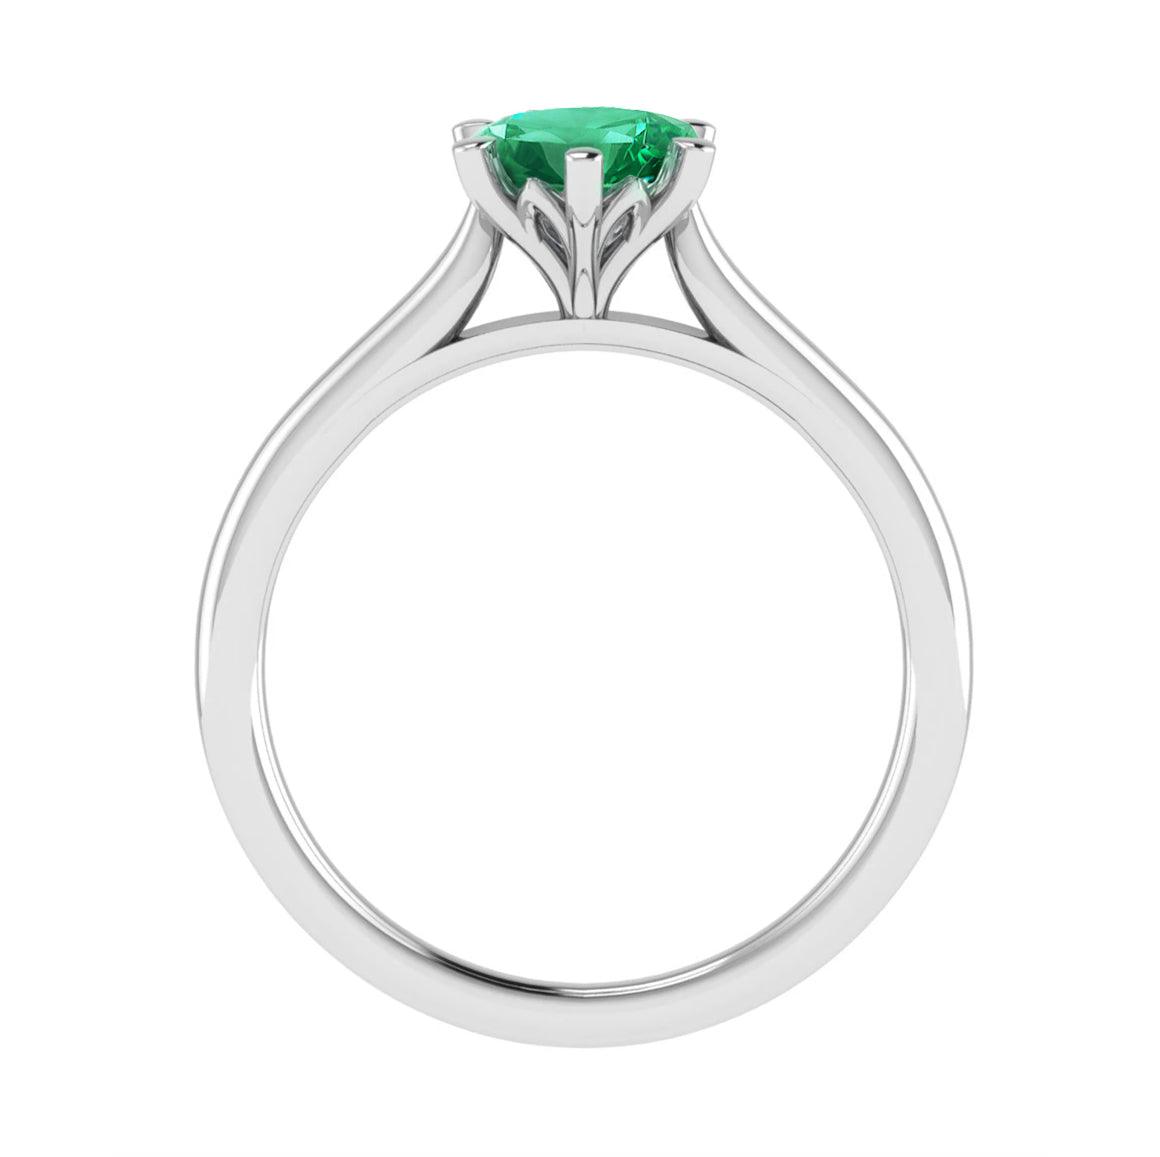 Six-Claw Solitaire Engagement Ring in 18k Gold - XMERALDA 